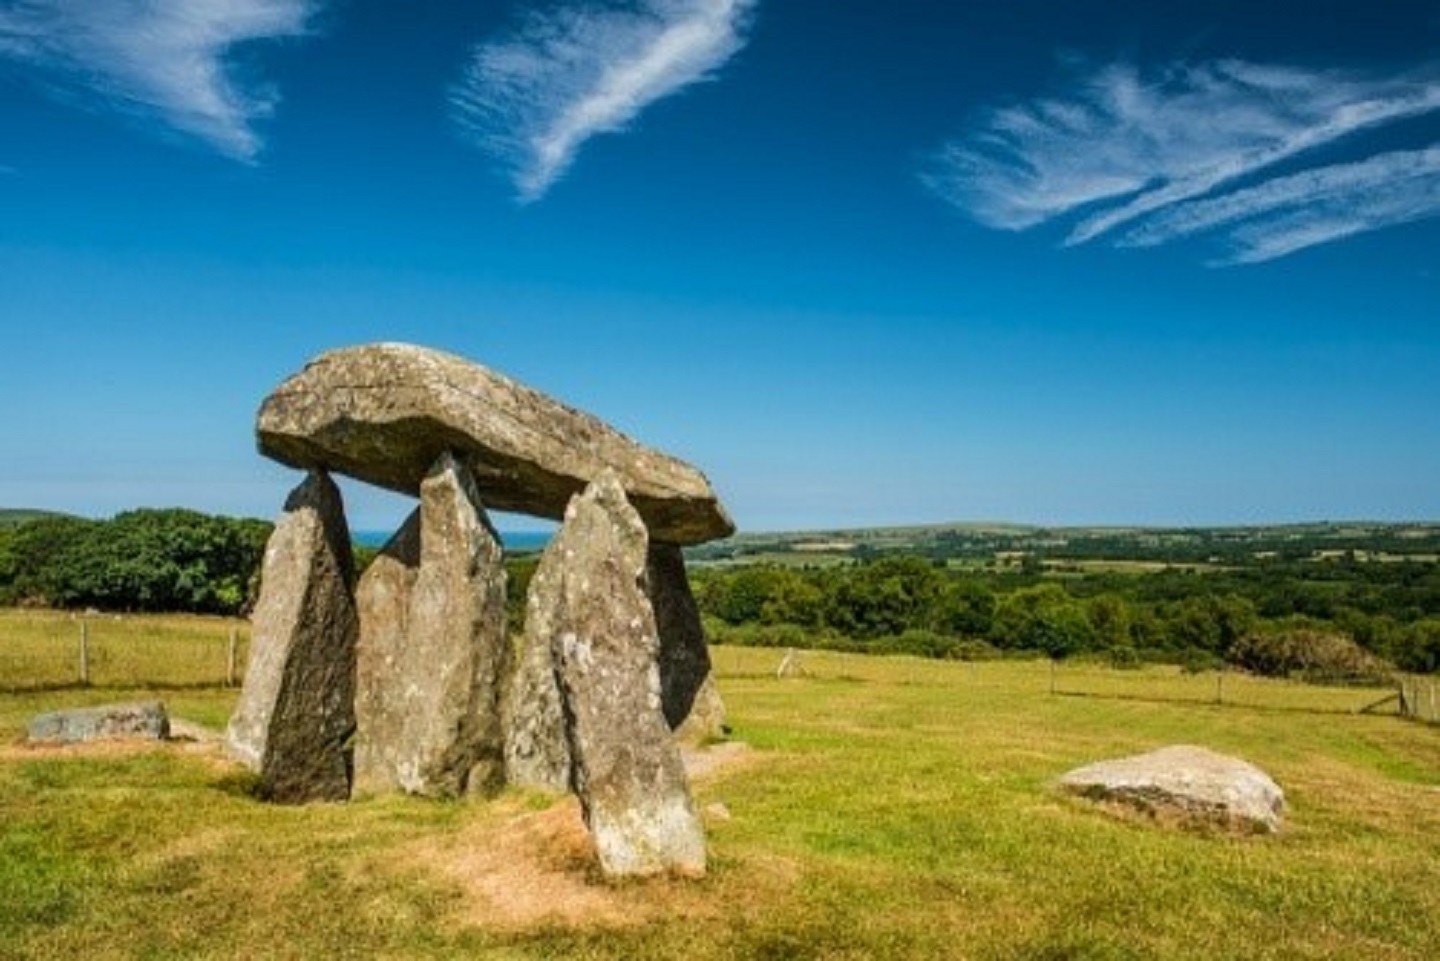 The Pentre Ifan burial chamber in the hills of Preseli, one of the four coastal areas that feature in the Coastal Uplands Heritage and Tourism project.